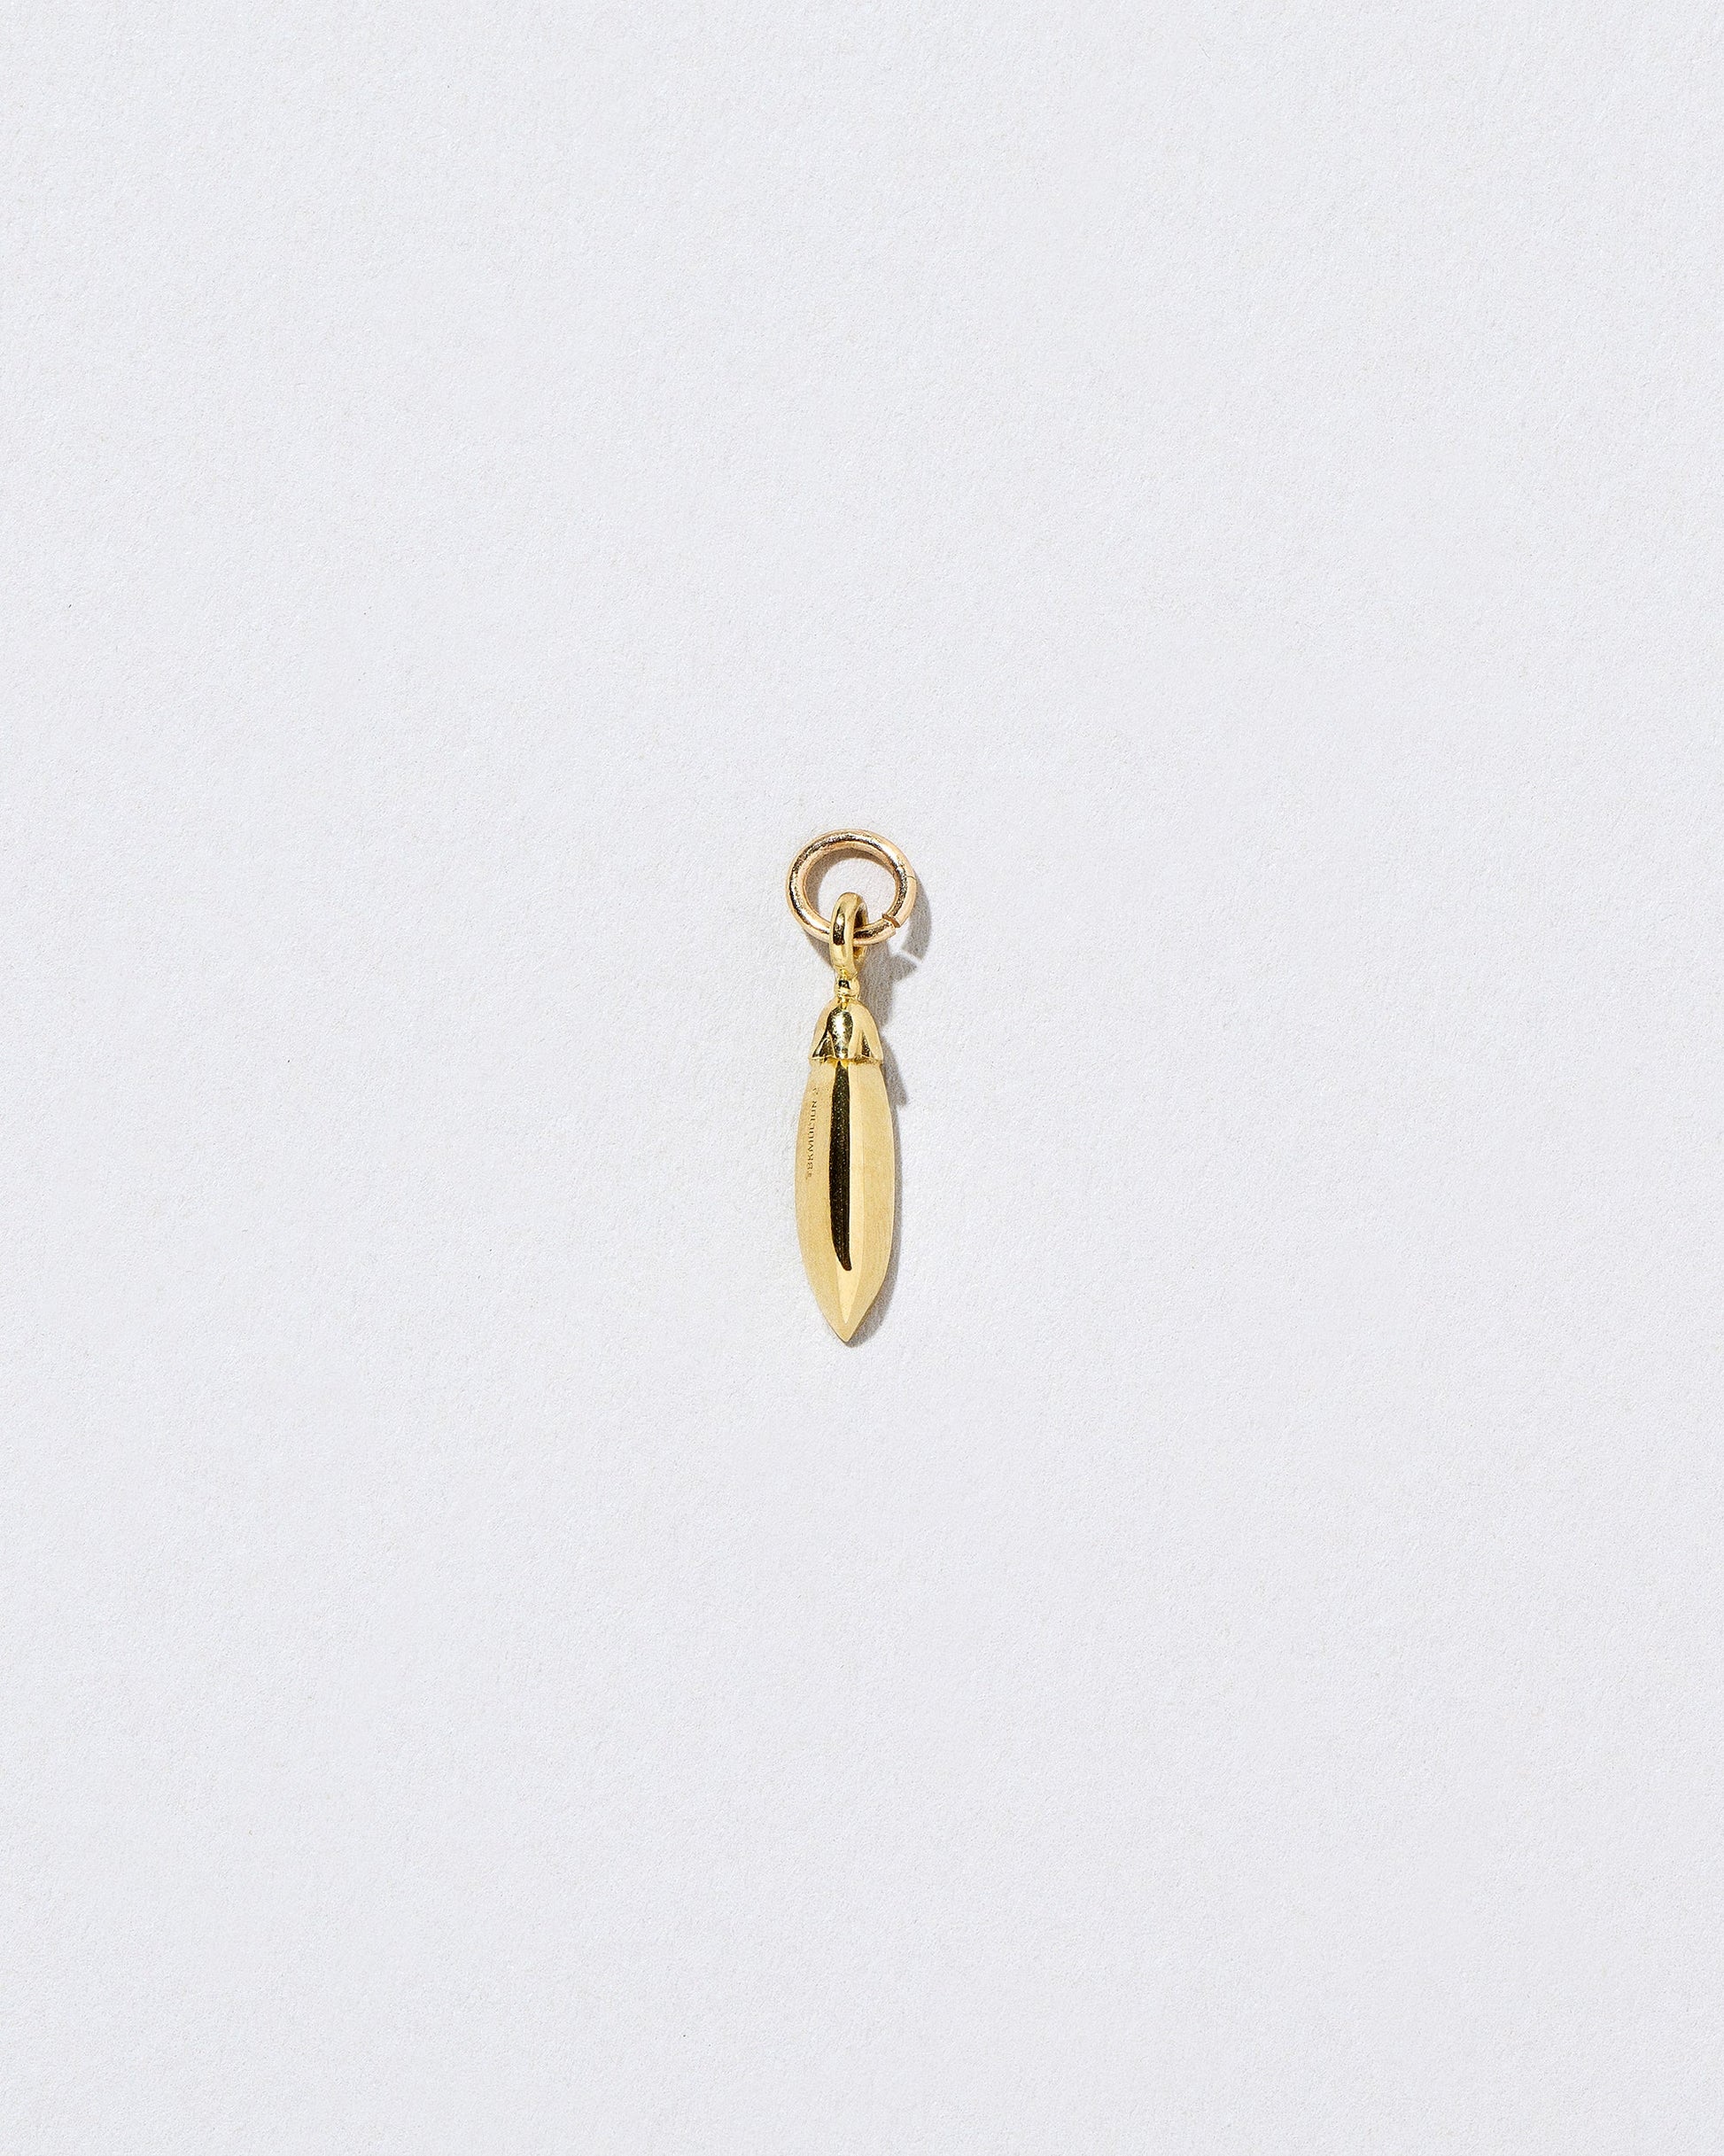  Snap Pea Charm on light color background.